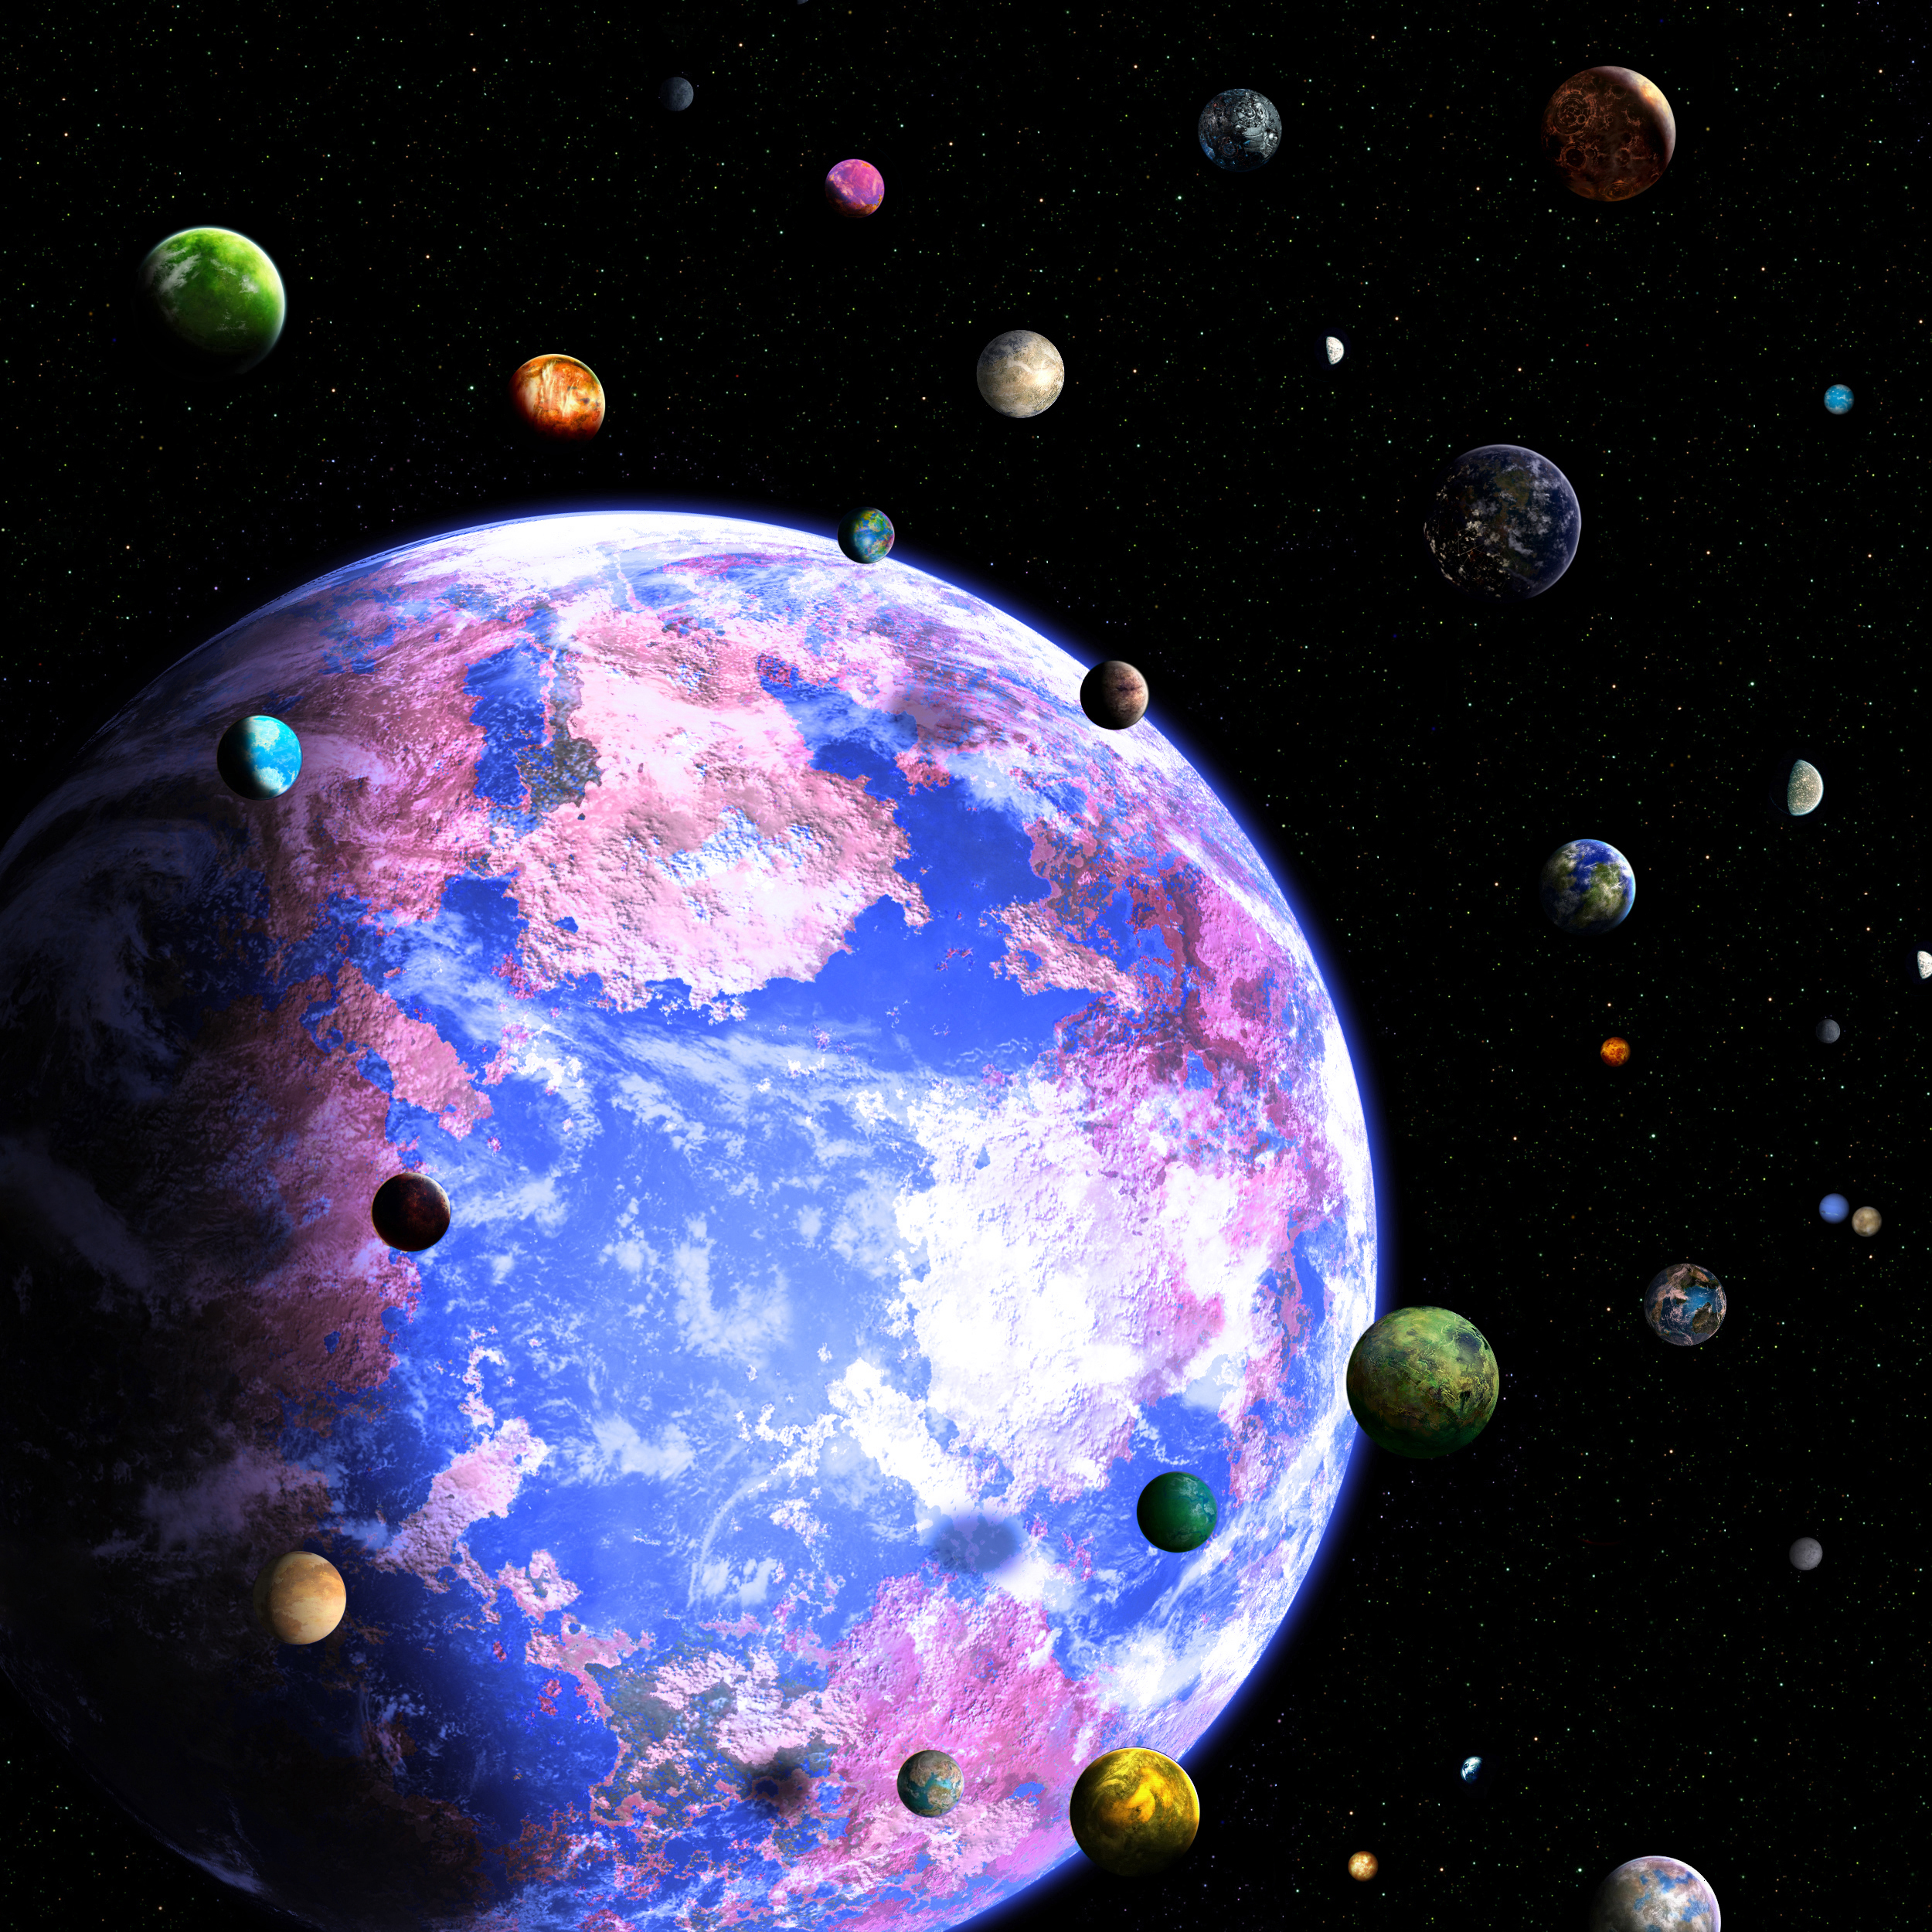 planet_of_a_thousand_moons_by_bbbeto-d3byc4q.jpg